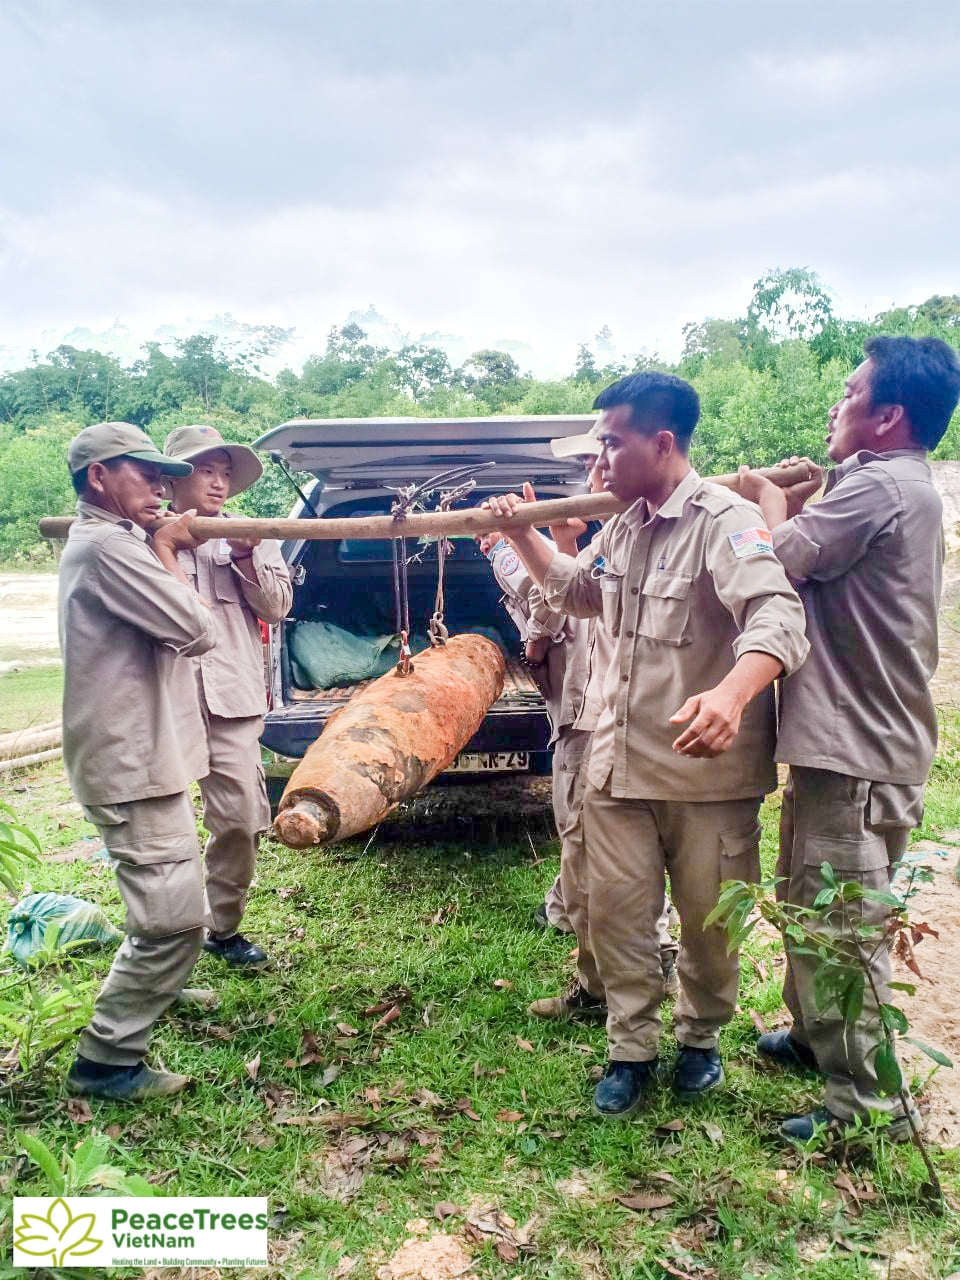 Foreign-funded projects help Vietnam deal with unexploded ordnance